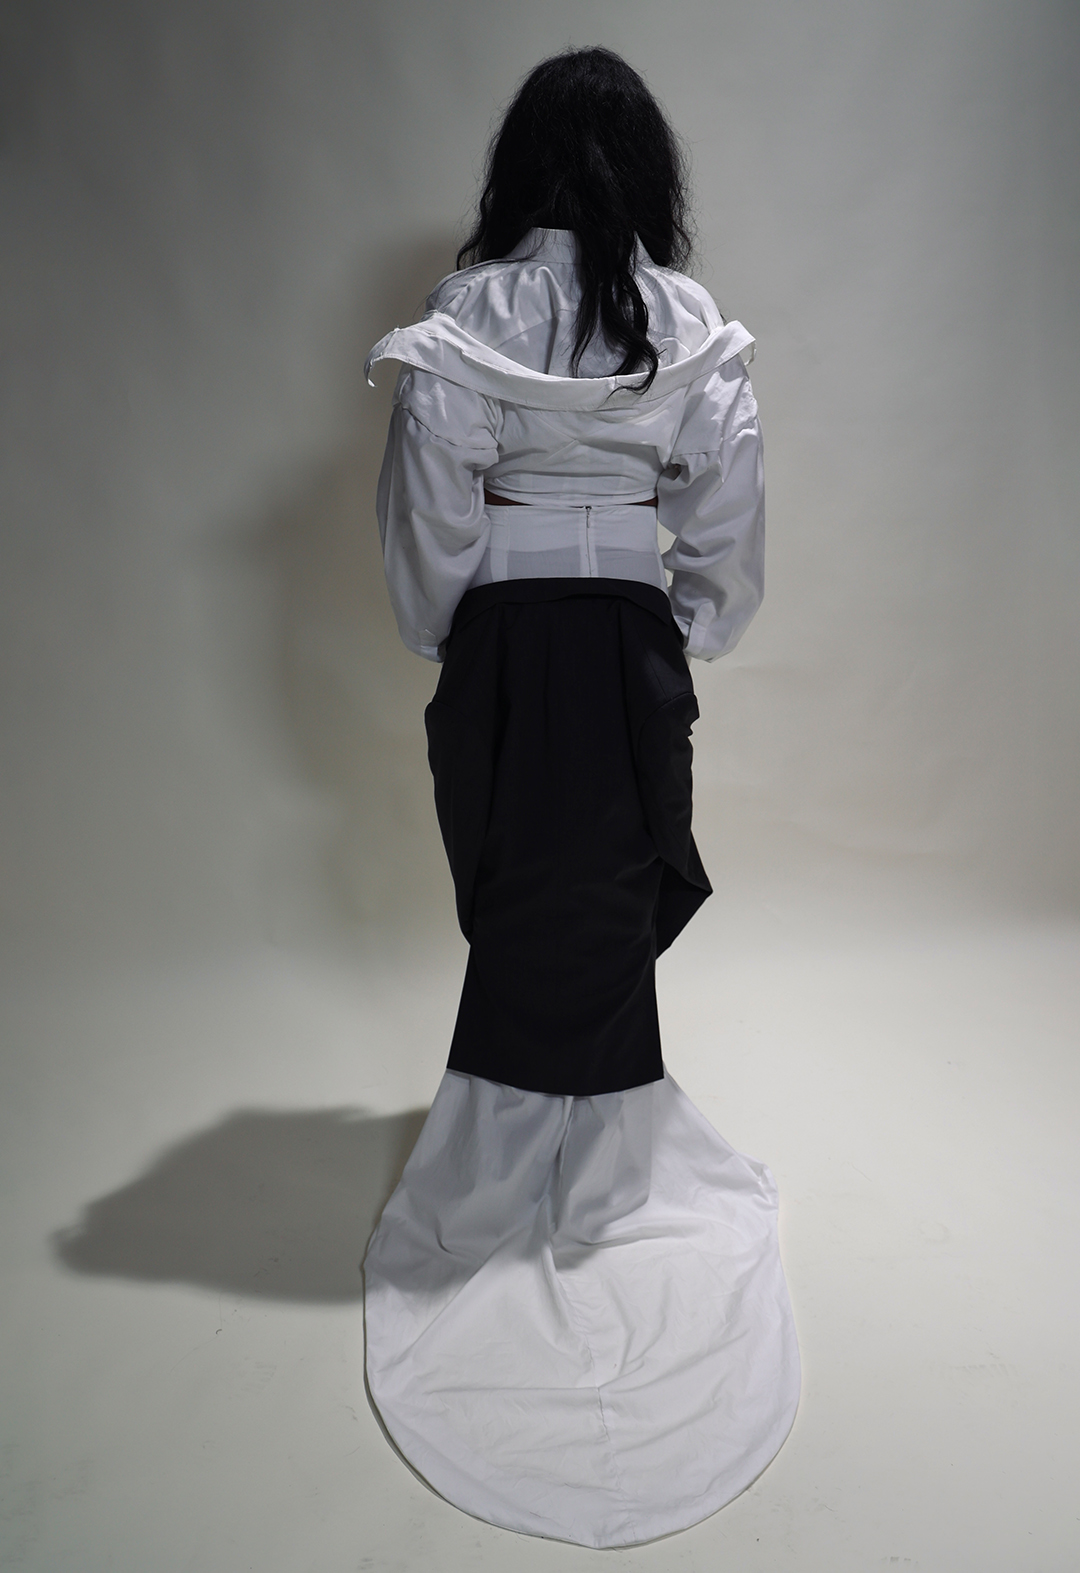 Back view of layered white shirts hanging from the shoulders. Skirt train with deconstructed jacket.